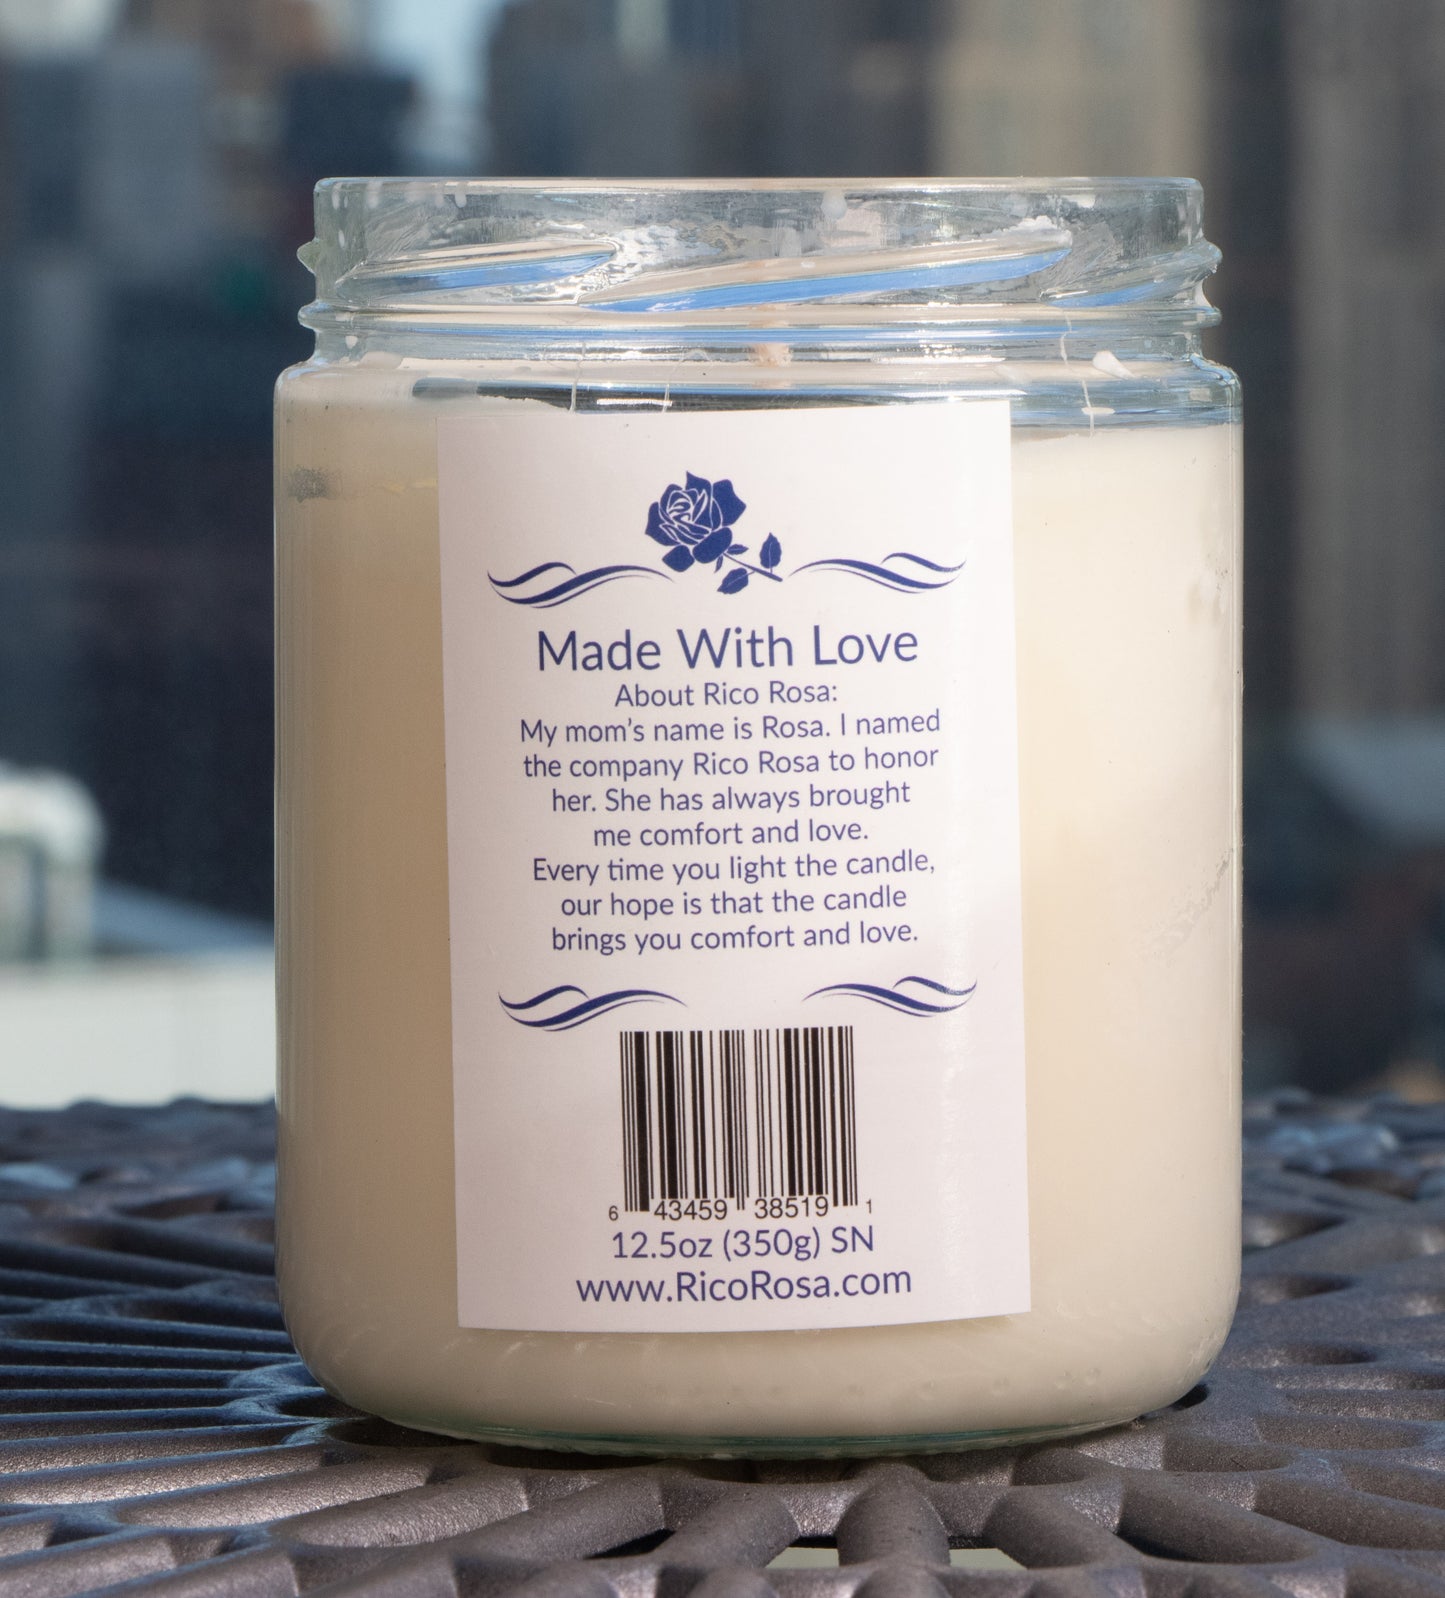 Summer Nights: Natural Scented  Midnight Citrus Blue Soy Candle